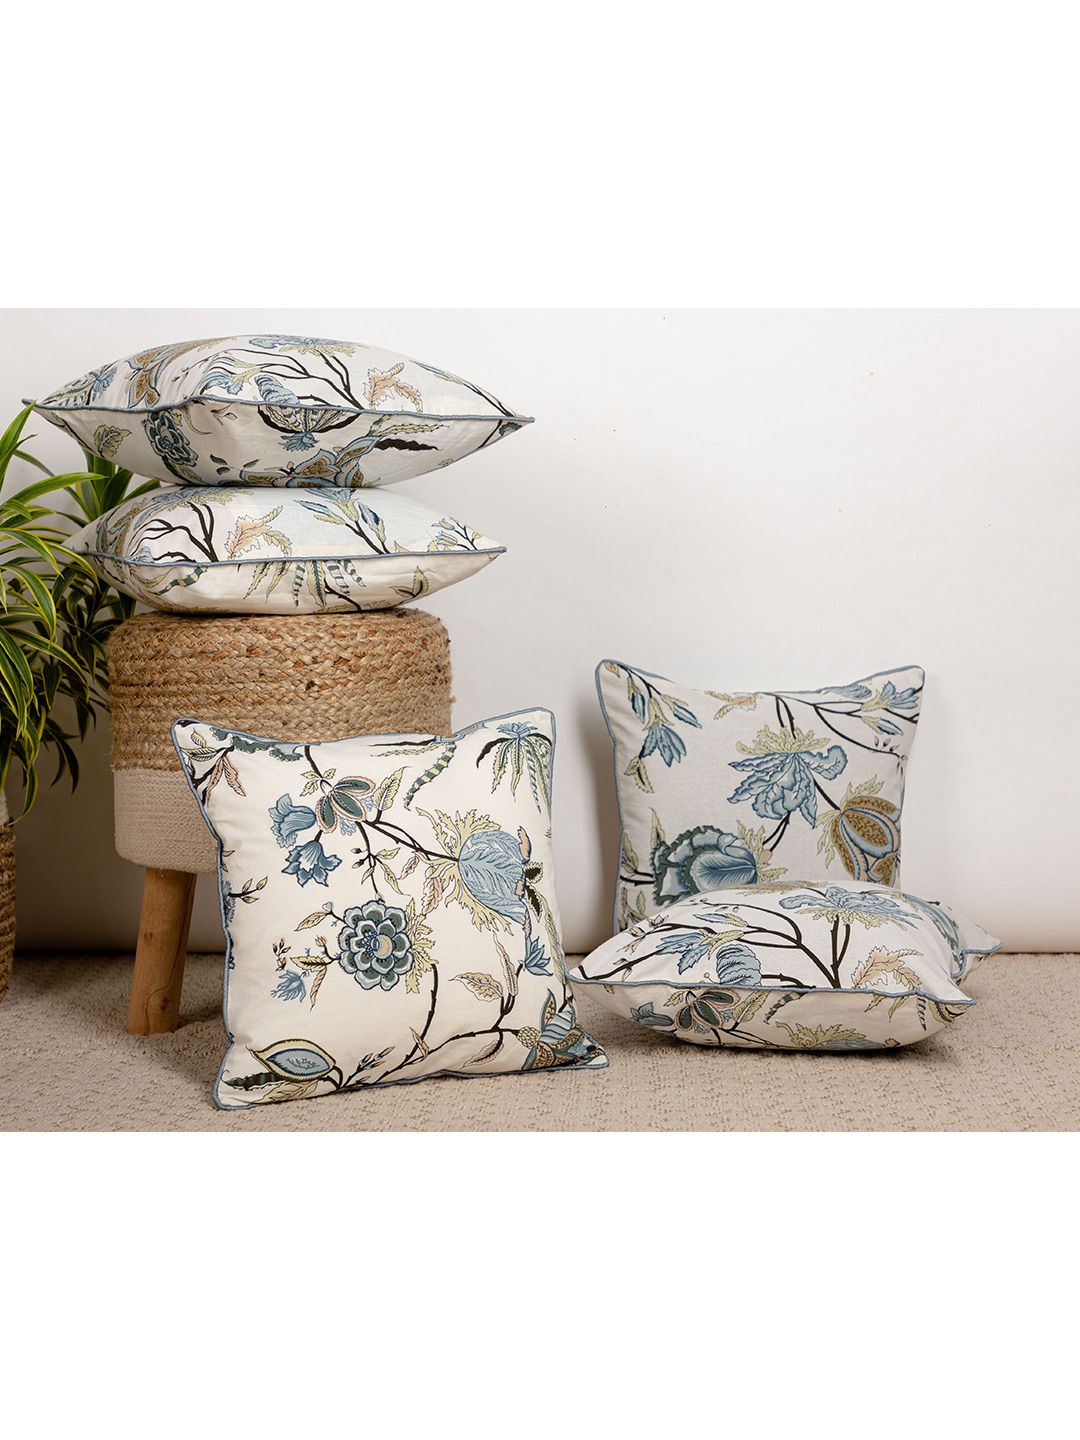 Jaipur Folk Pack Of 5 White & Blue Floral Square Cushion Covers Price in India